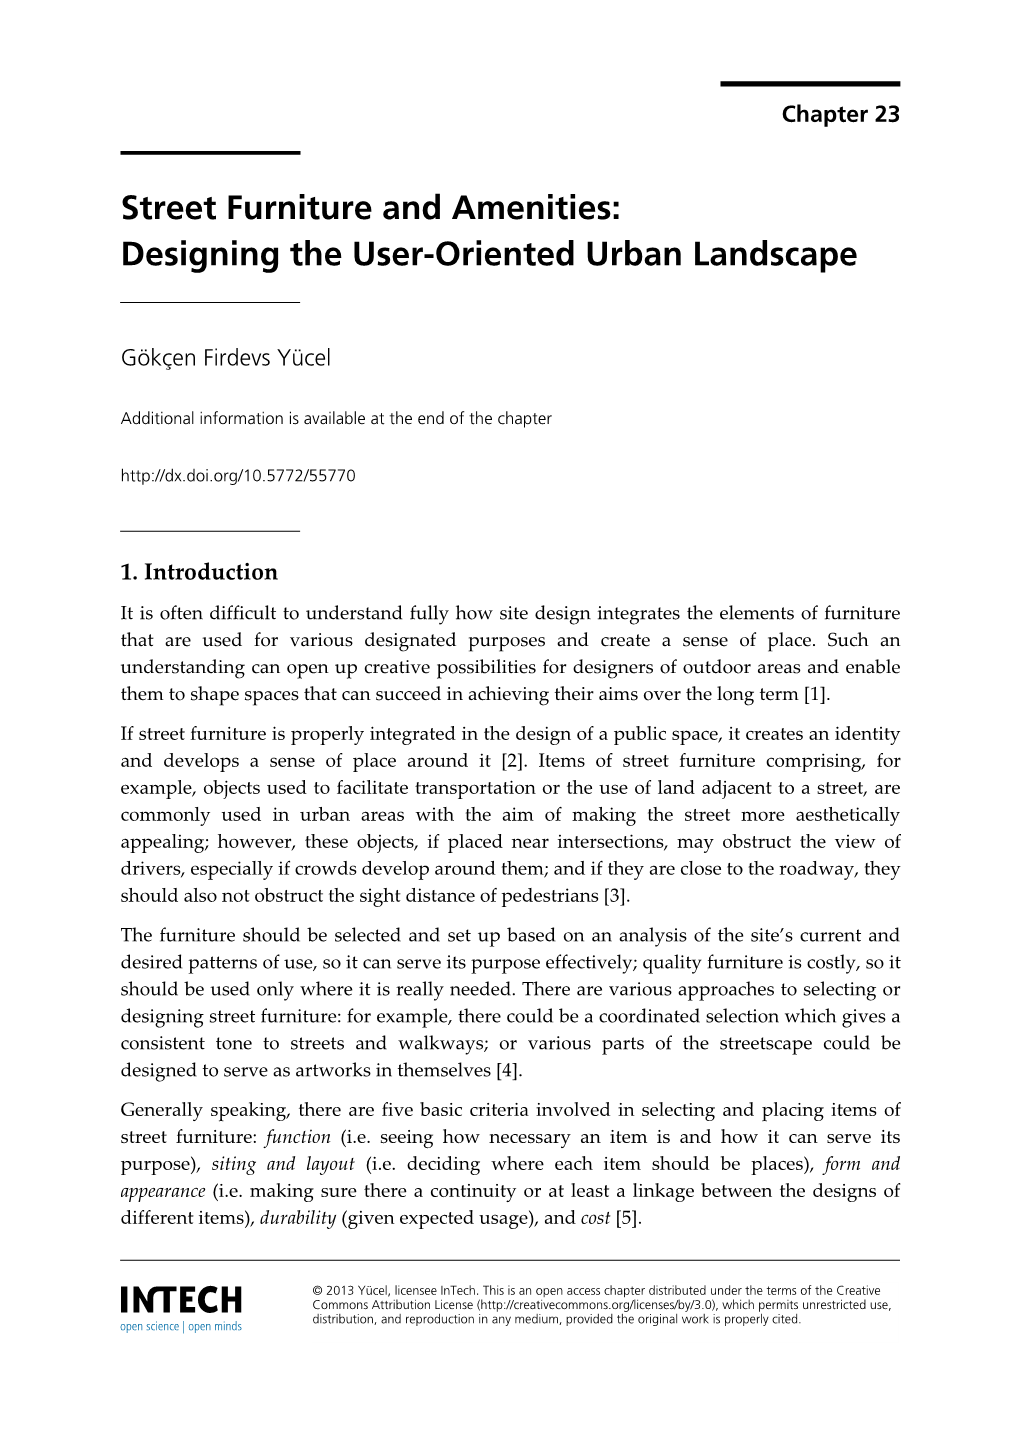 Street Furniture and Amenities: Designing the User-Oriented Urban Landscape